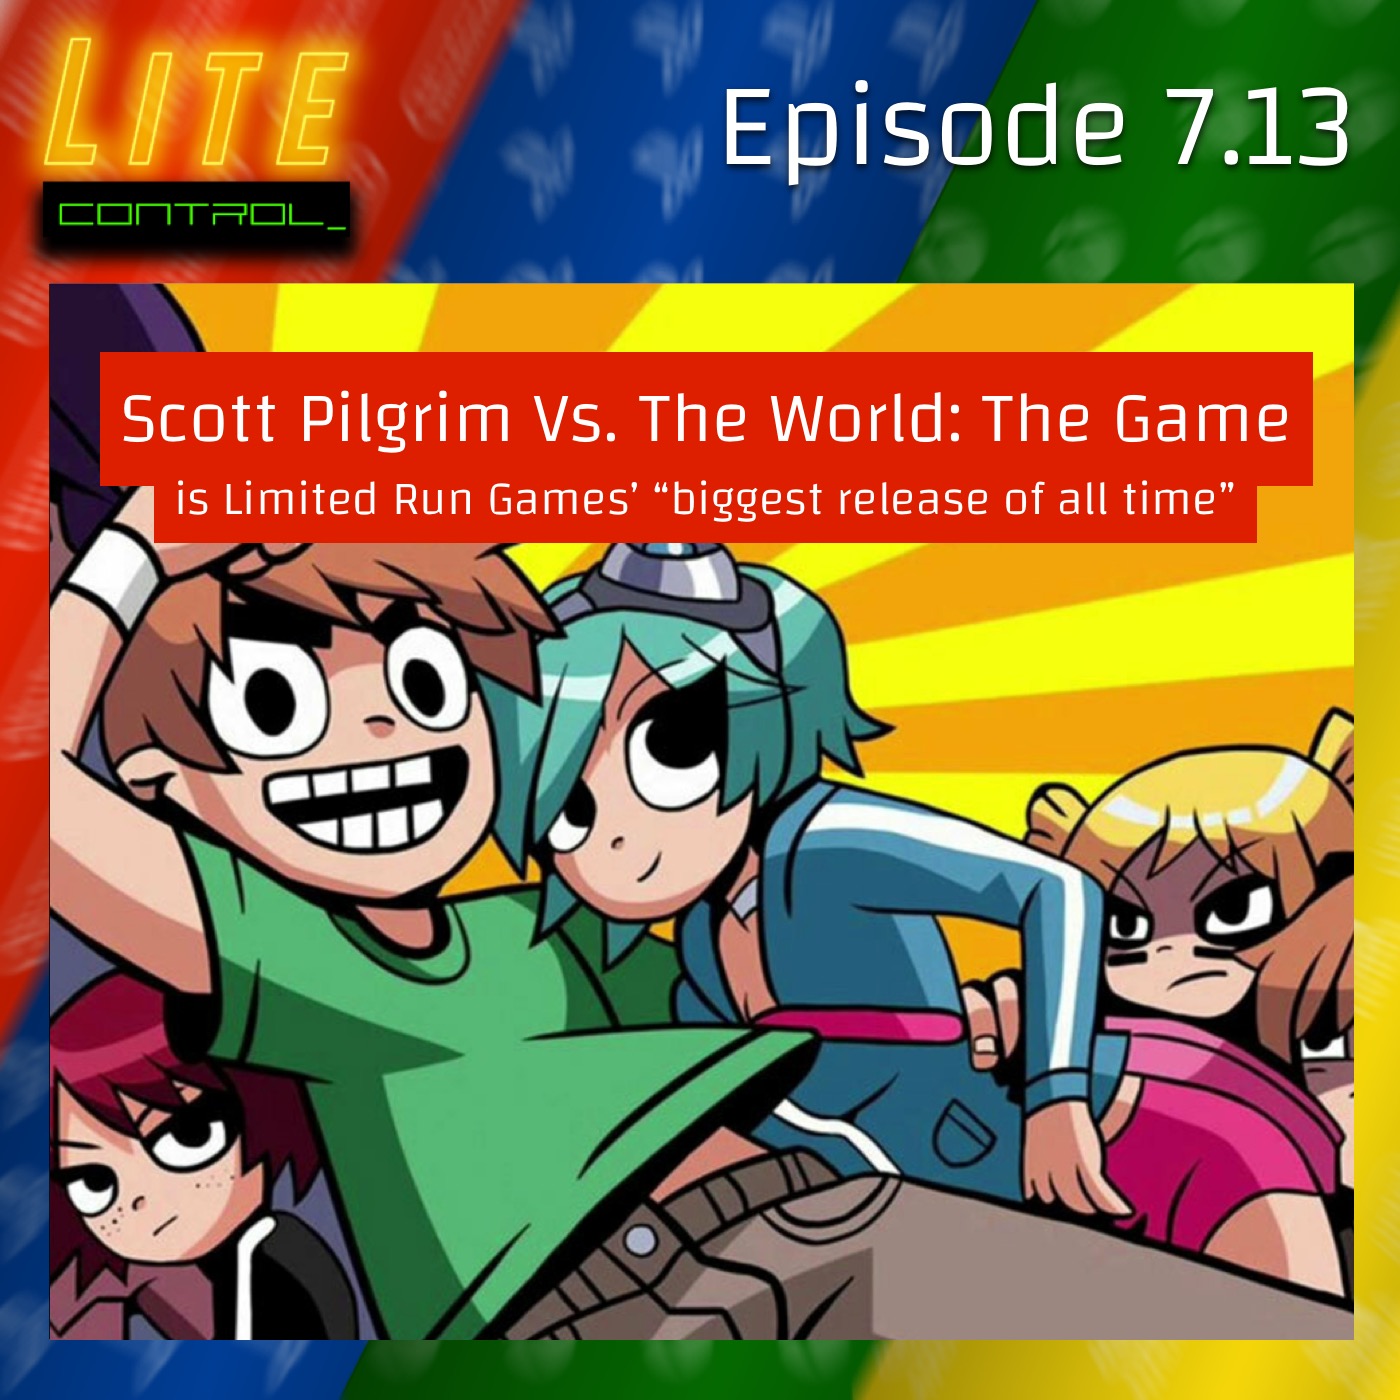 Lite Control 7.13 - Scott Pilgrim vs. The World (The Game) is Limited Run's Biggest Launch Ever